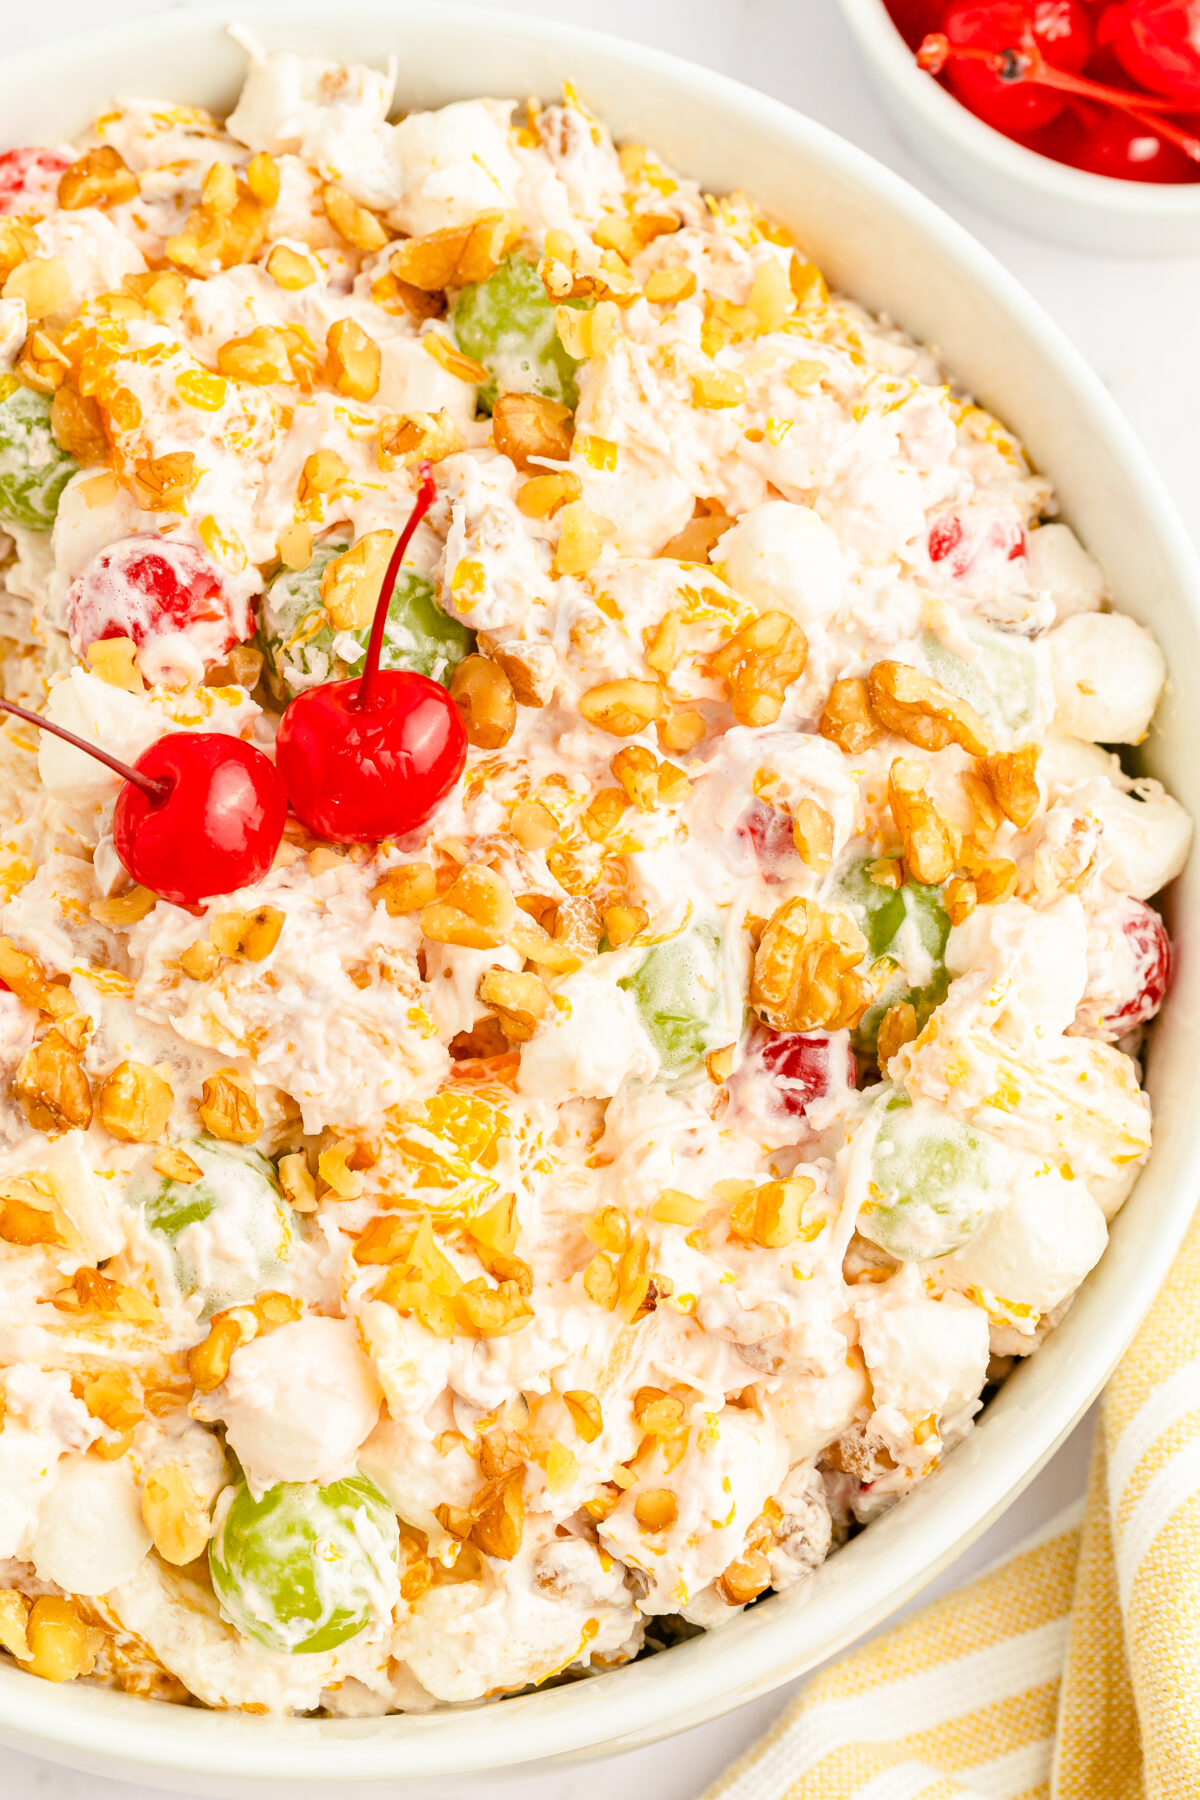 A classic ambrosia salad recipe that is sure to impress - this vintage salad features fruit tossed in a creamy dressing with marshmallows!